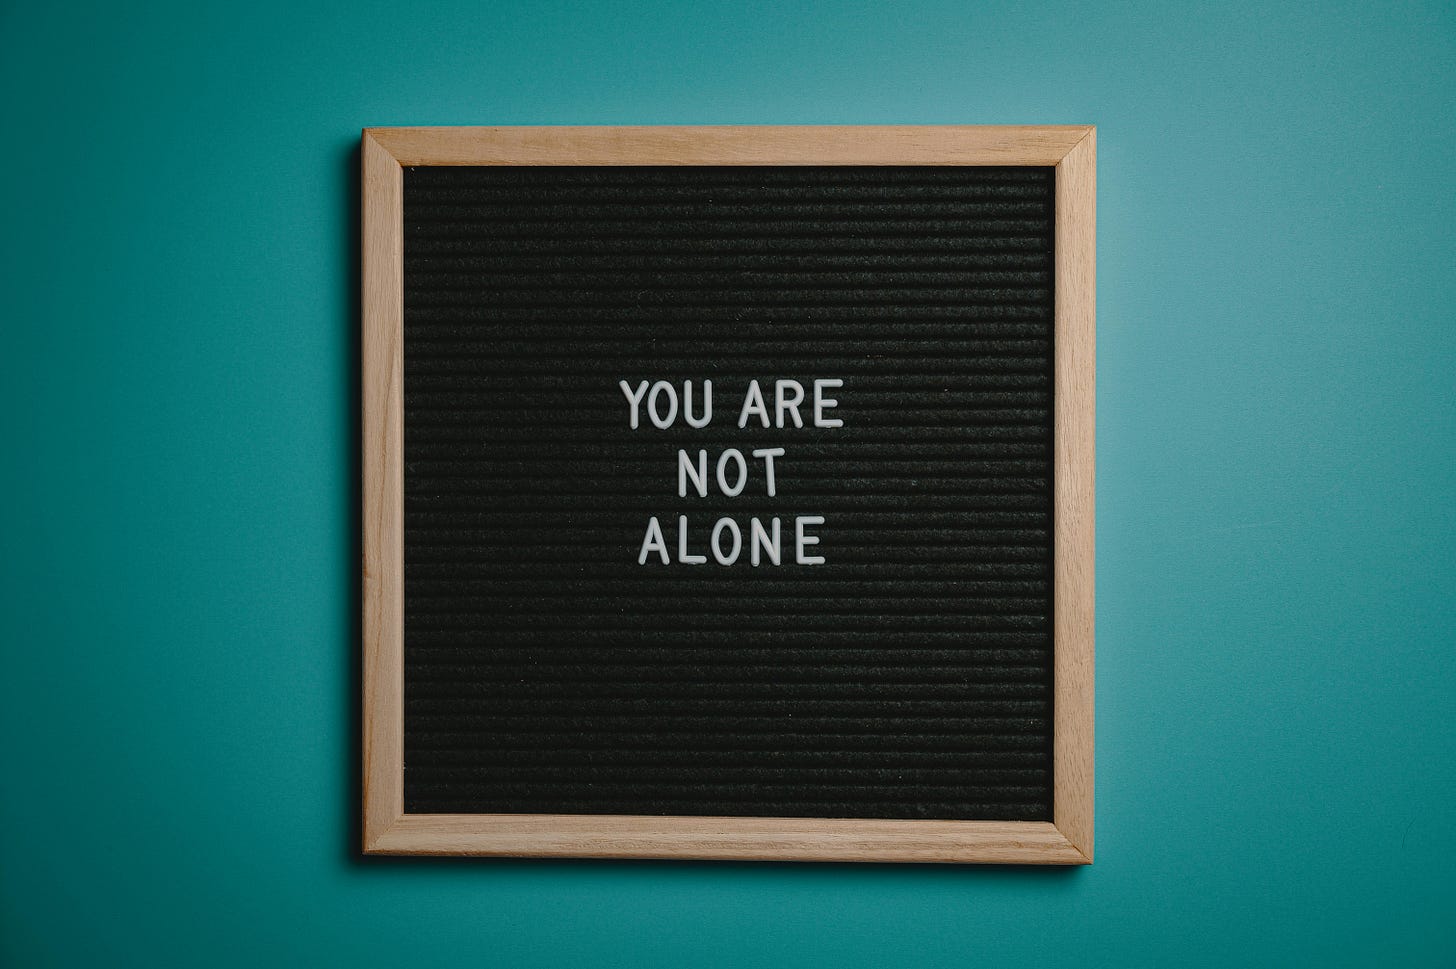 The words “You are not alone” appears on a board on a teal wall.